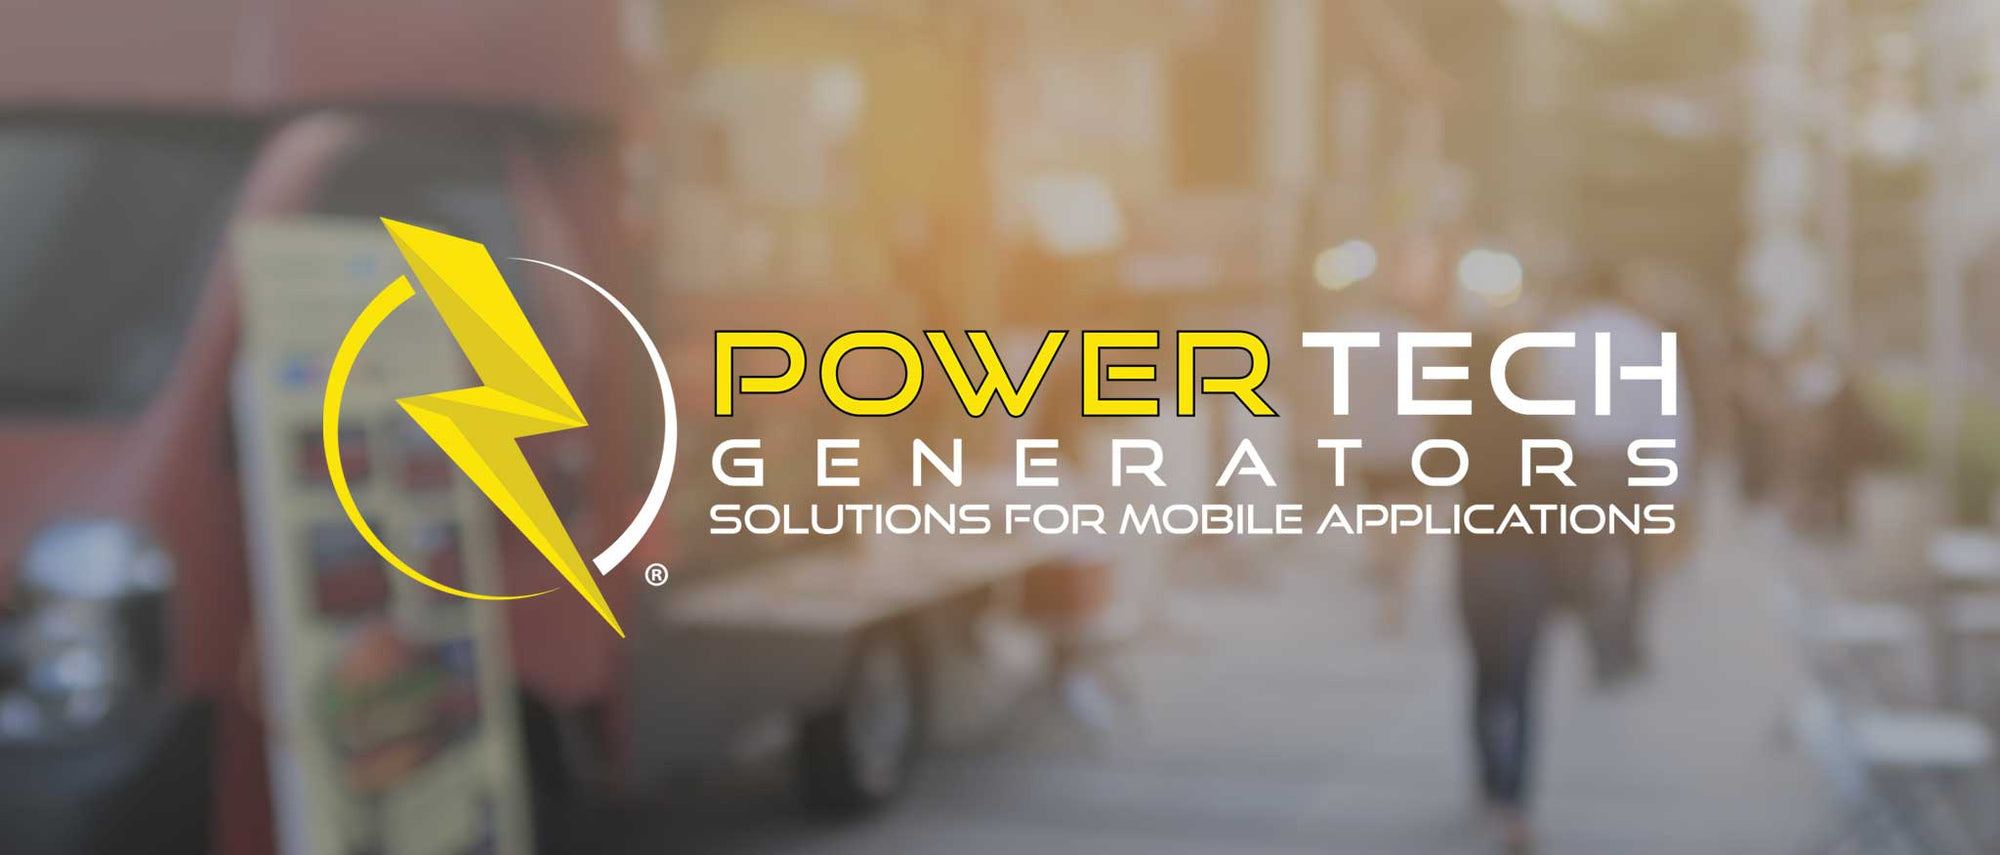 PowerTech Custom Generators for Medical, Commercial, Homeland Security, and Military Vehicles.